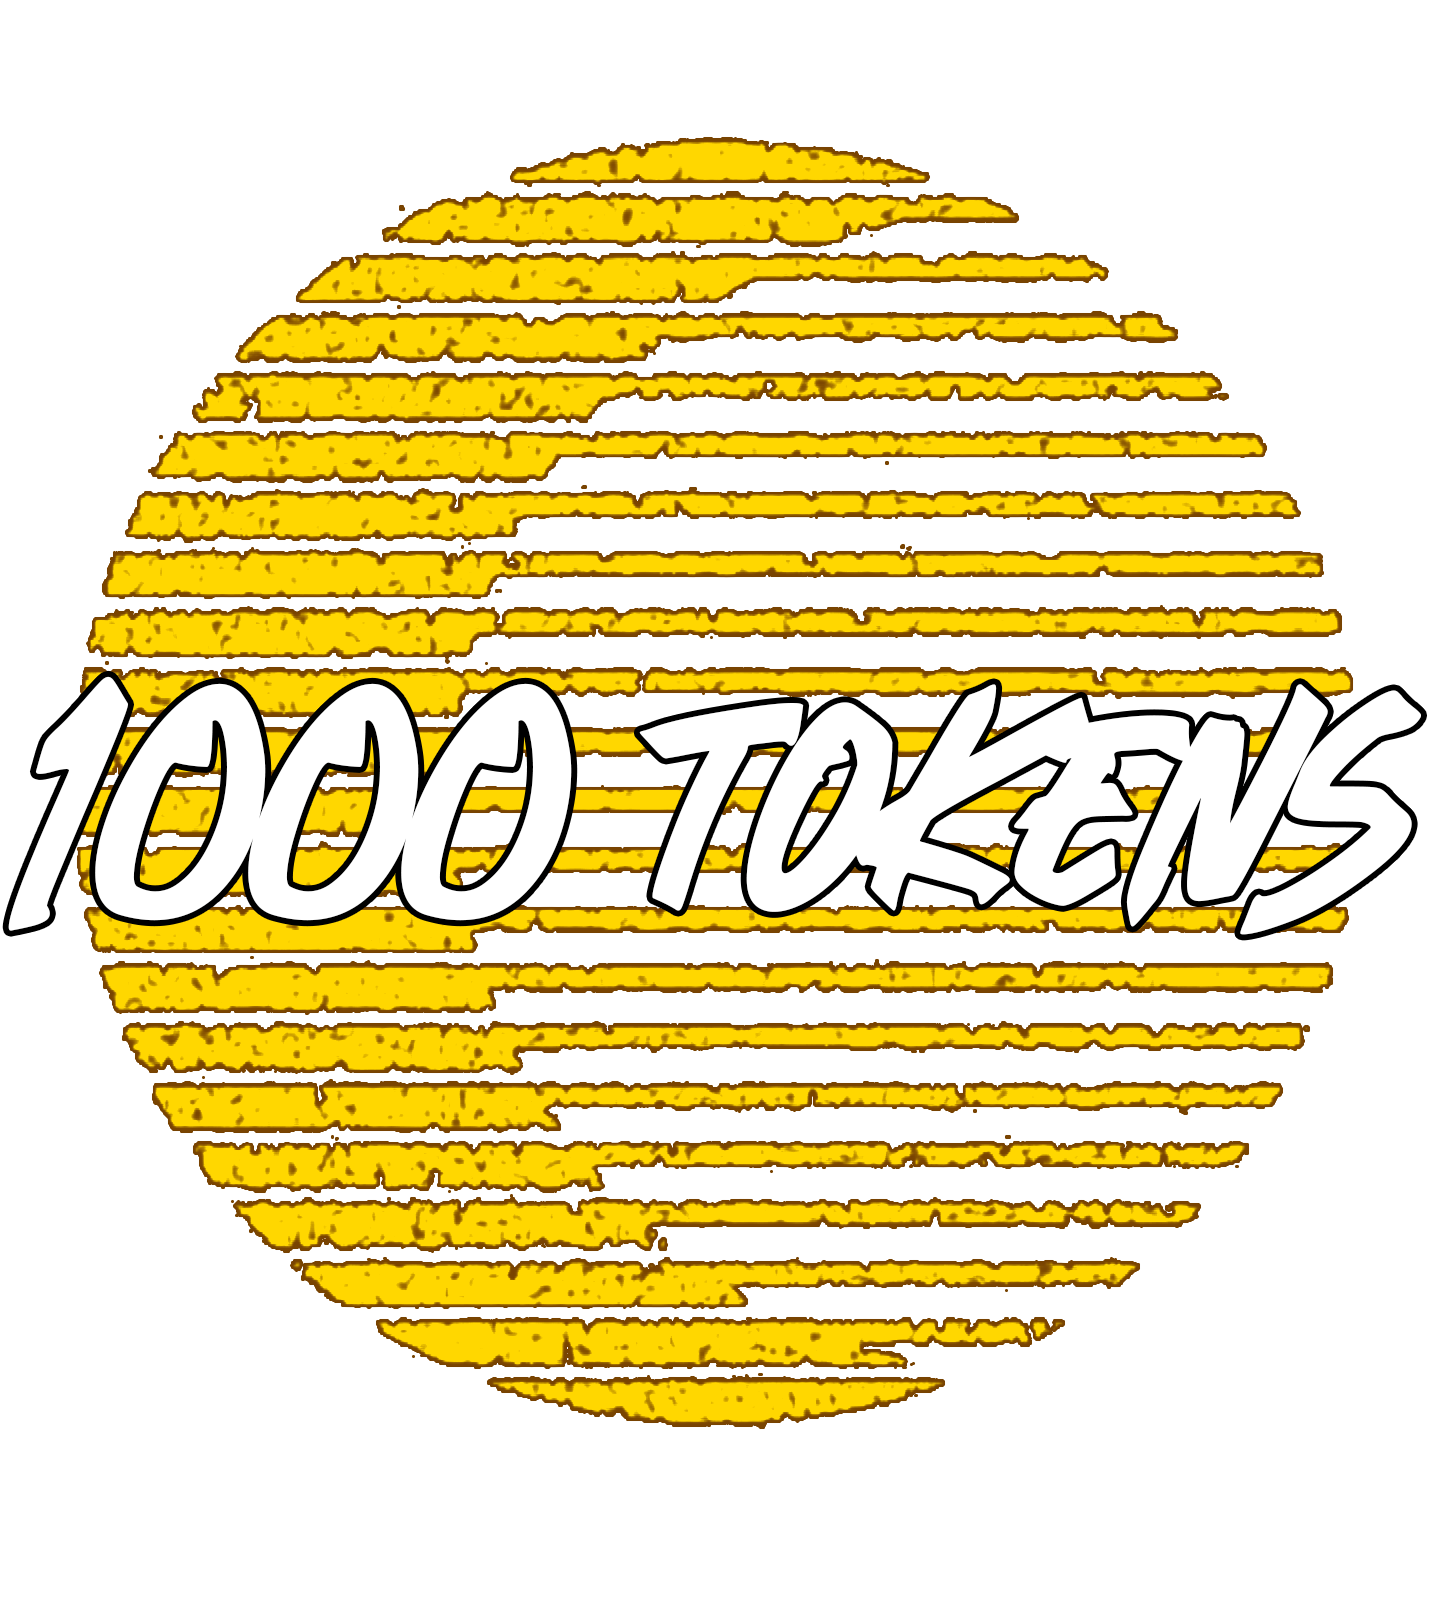 1000 Tokens